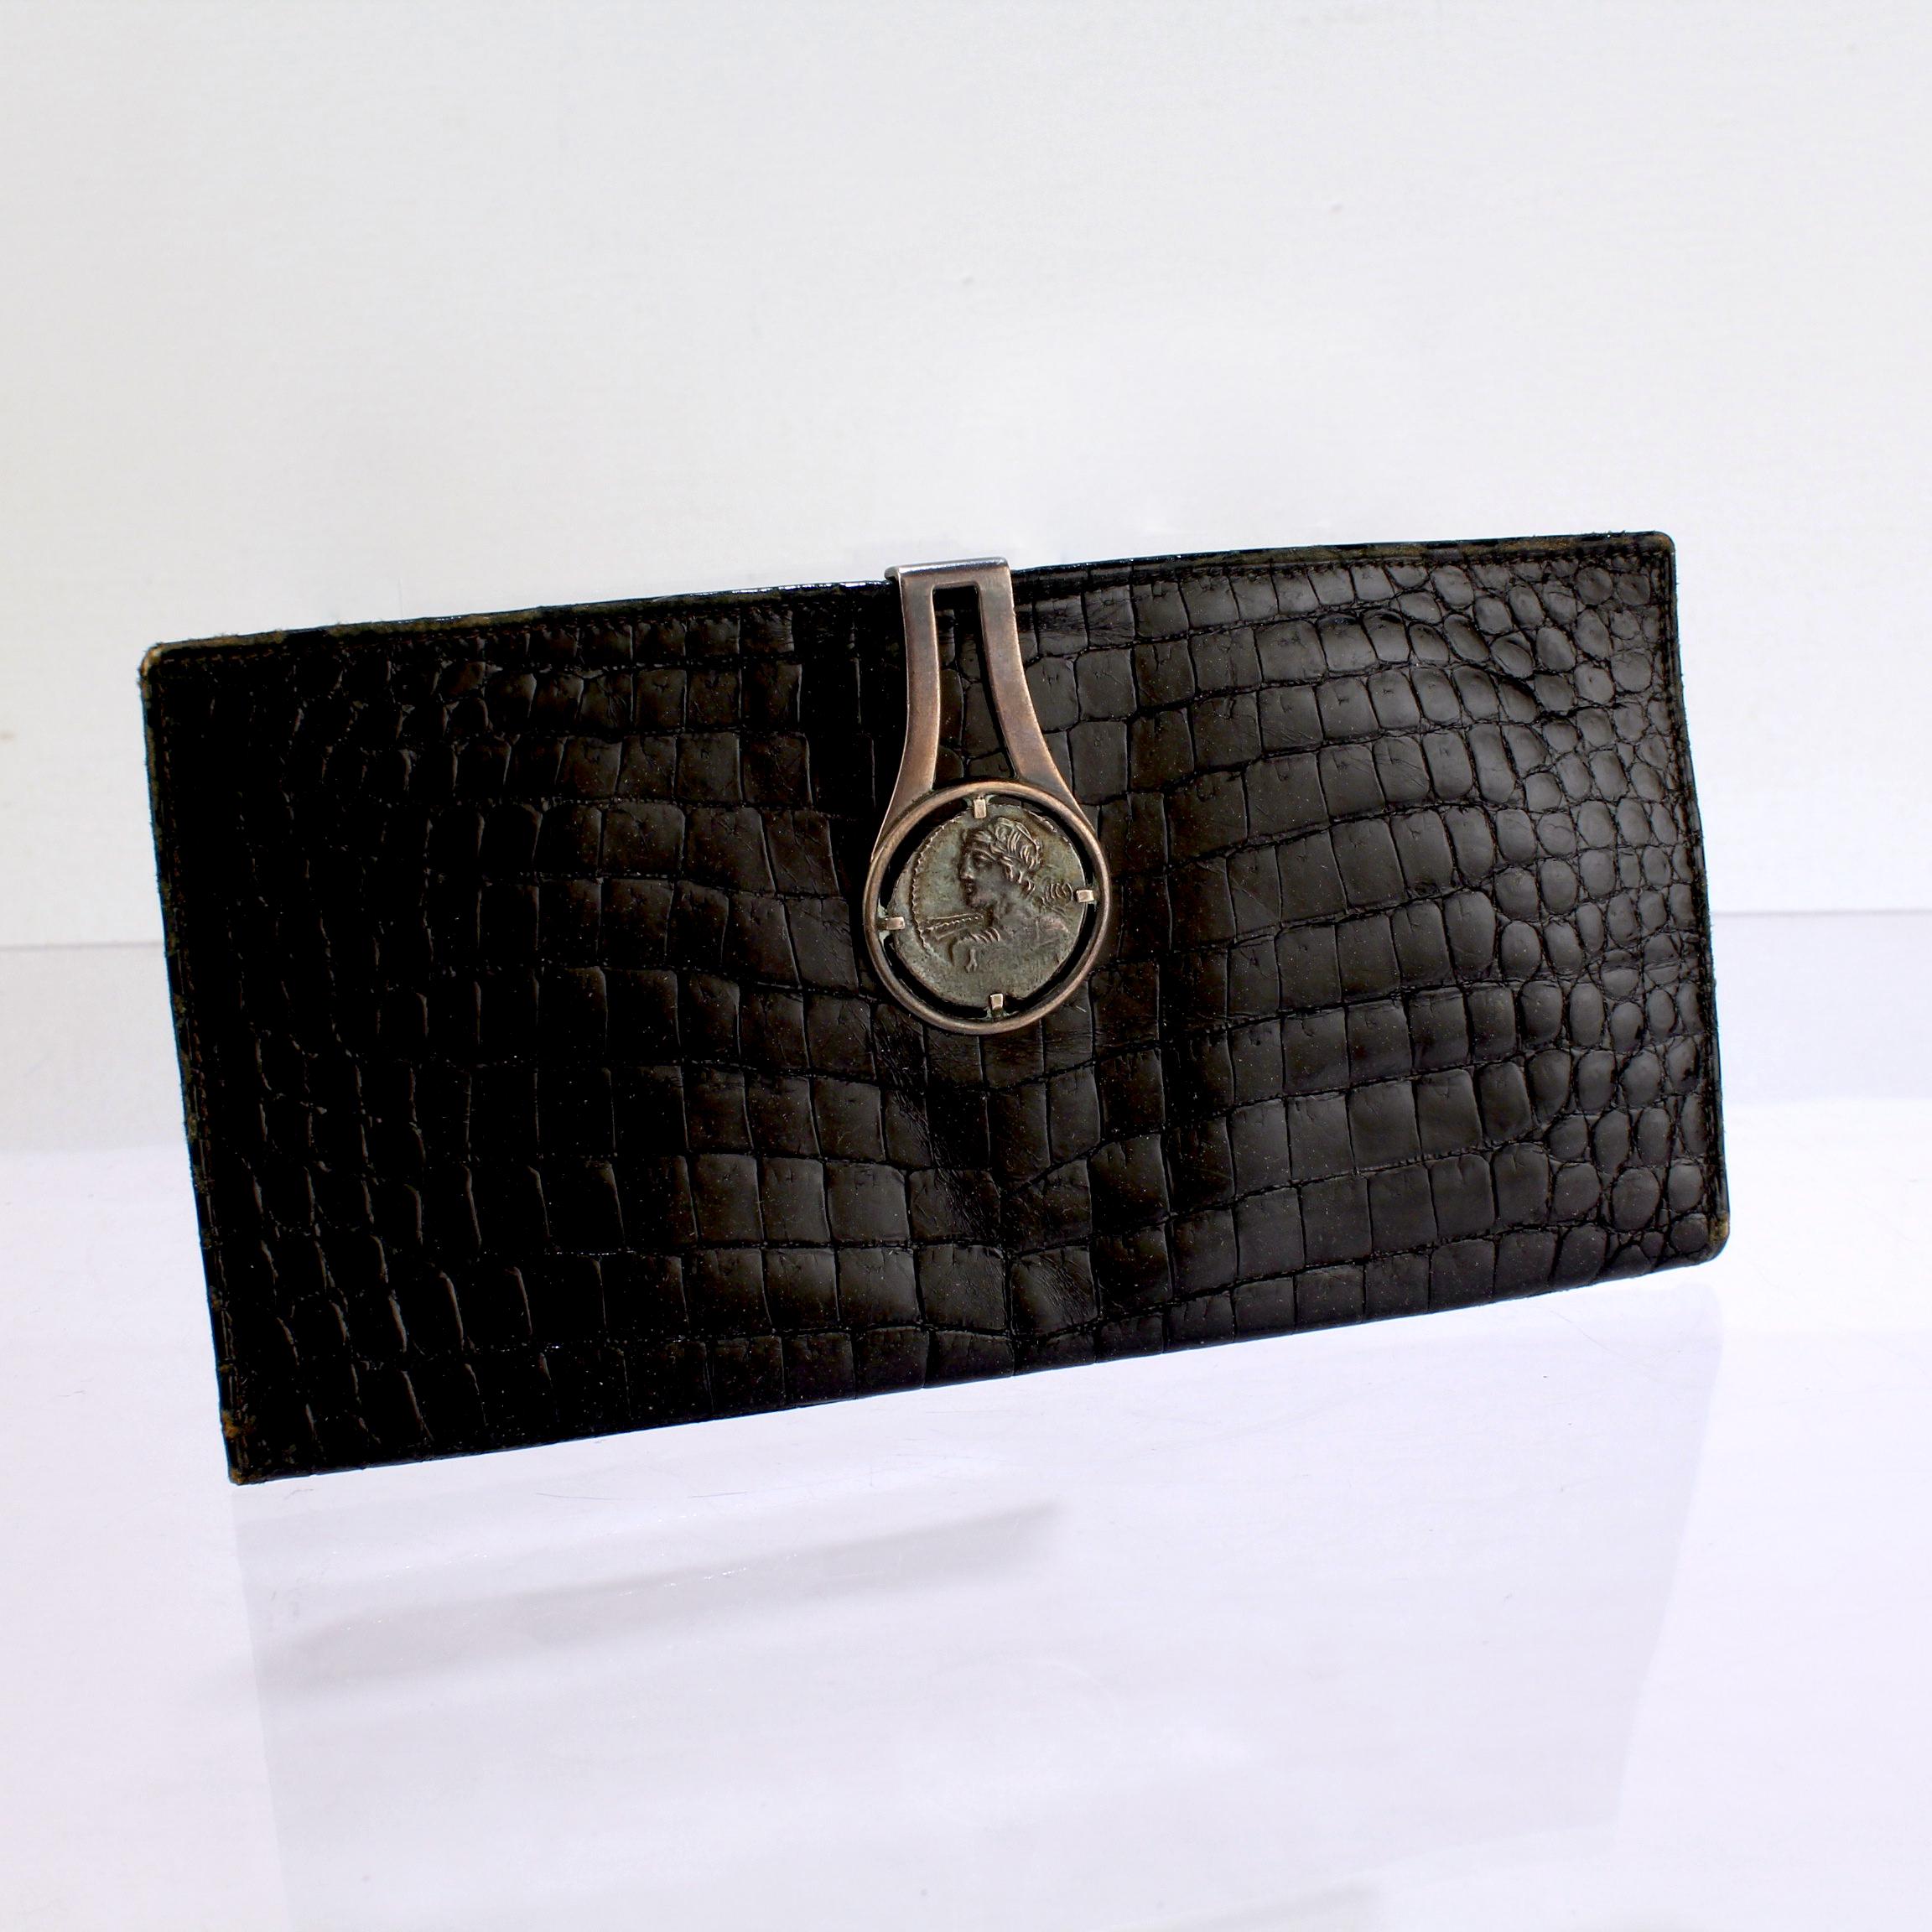 A fine Gucci wallet.

With black faux alligator leather and an integral sterling silver clasp.

The silver clasp is prong set with an silver Ancient Roman style coin.

Simply an amazing wallet from a great retailer! 

Date:
20th Century

Overall